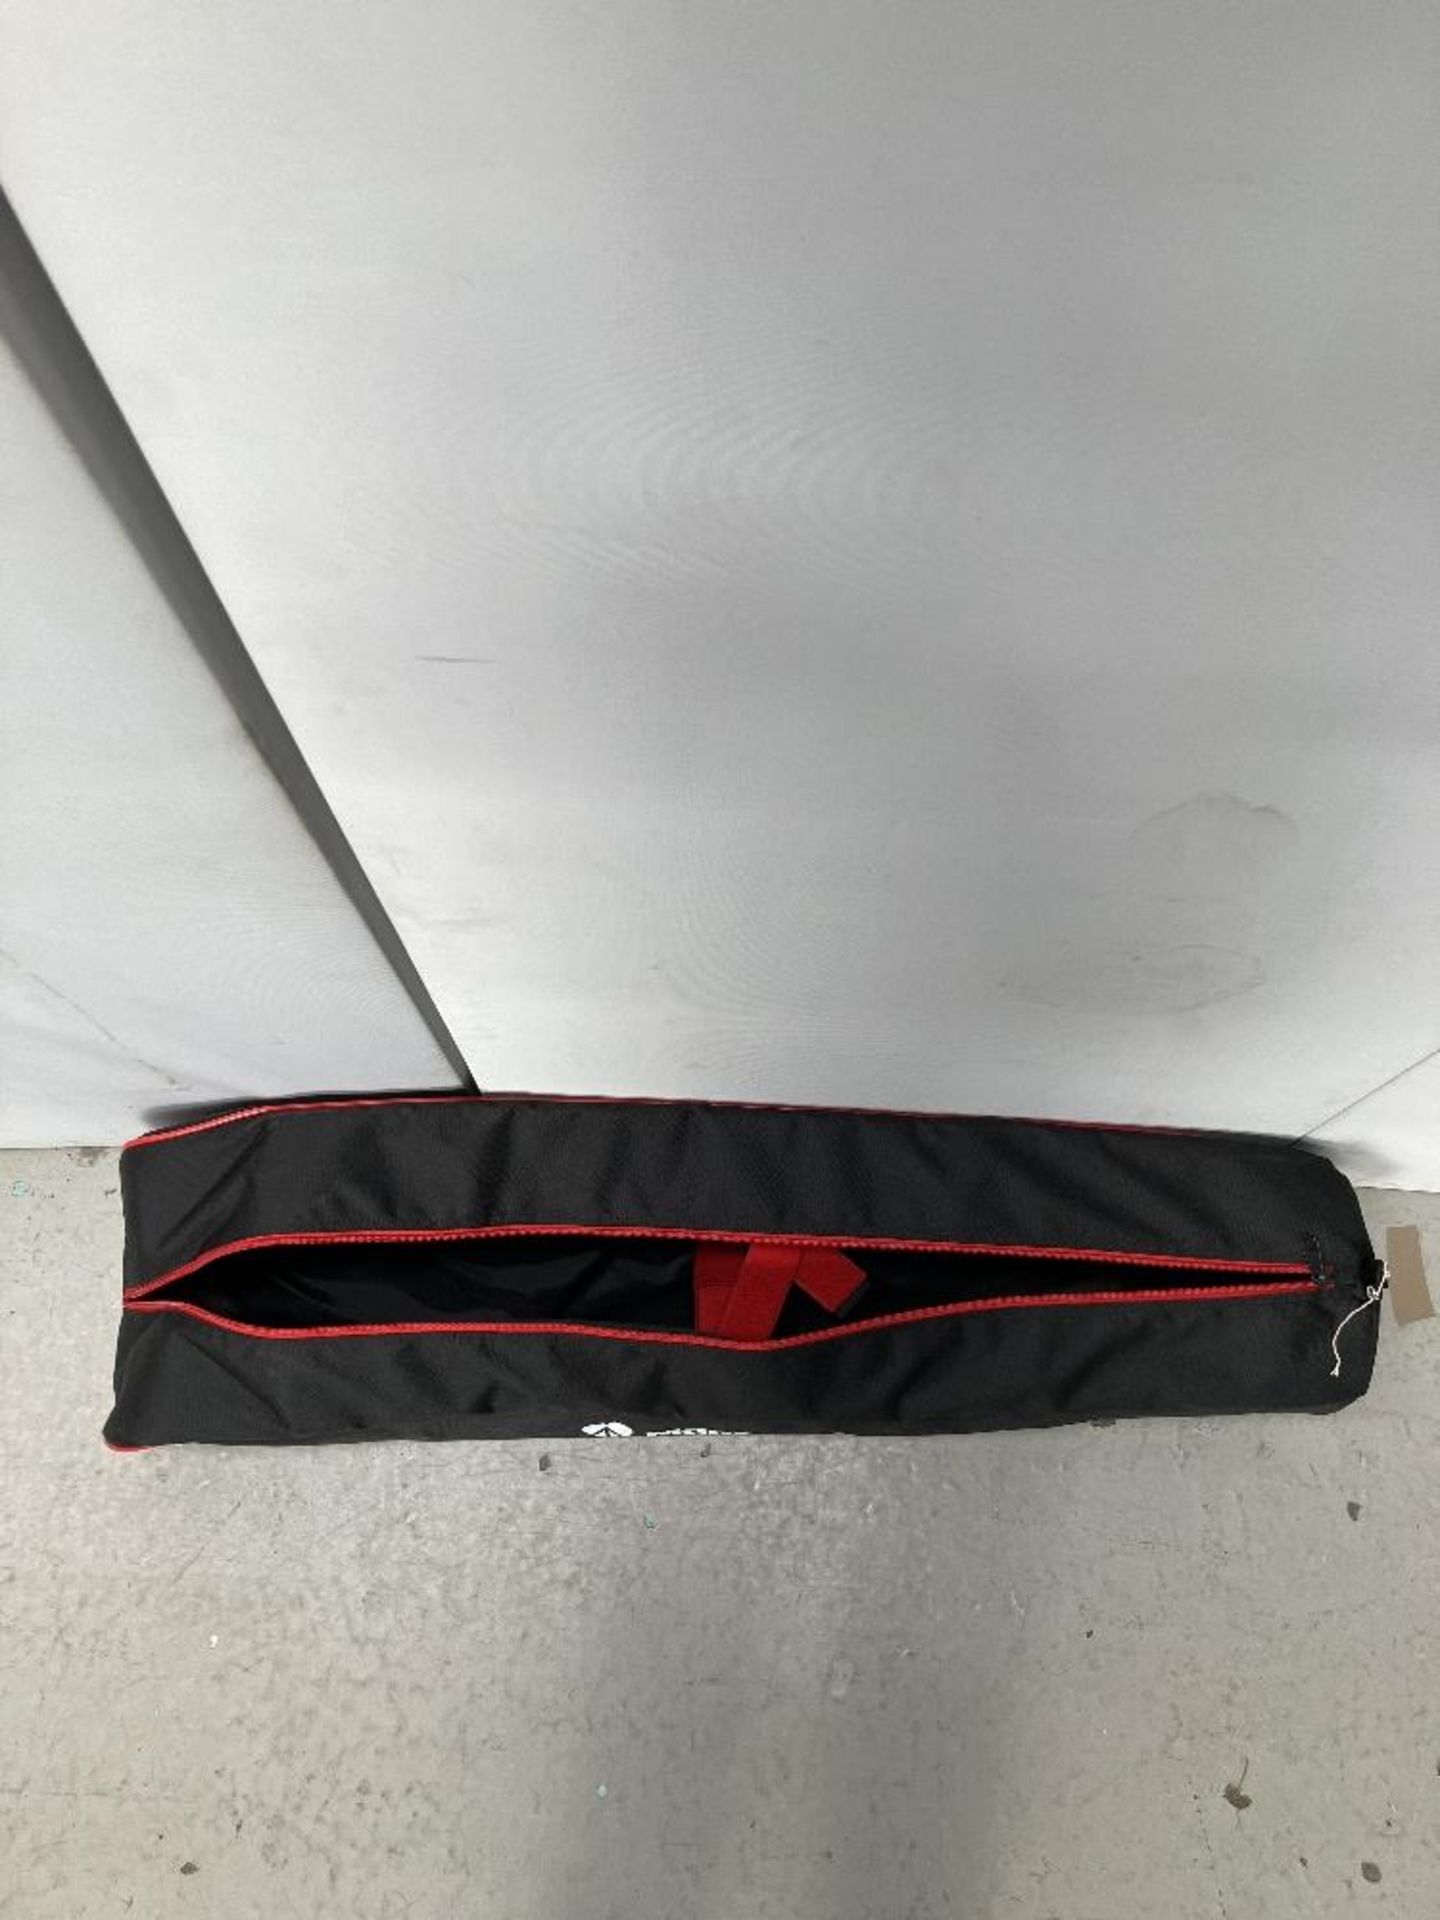 Manfrotto Tripod Bag - Image 2 of 2